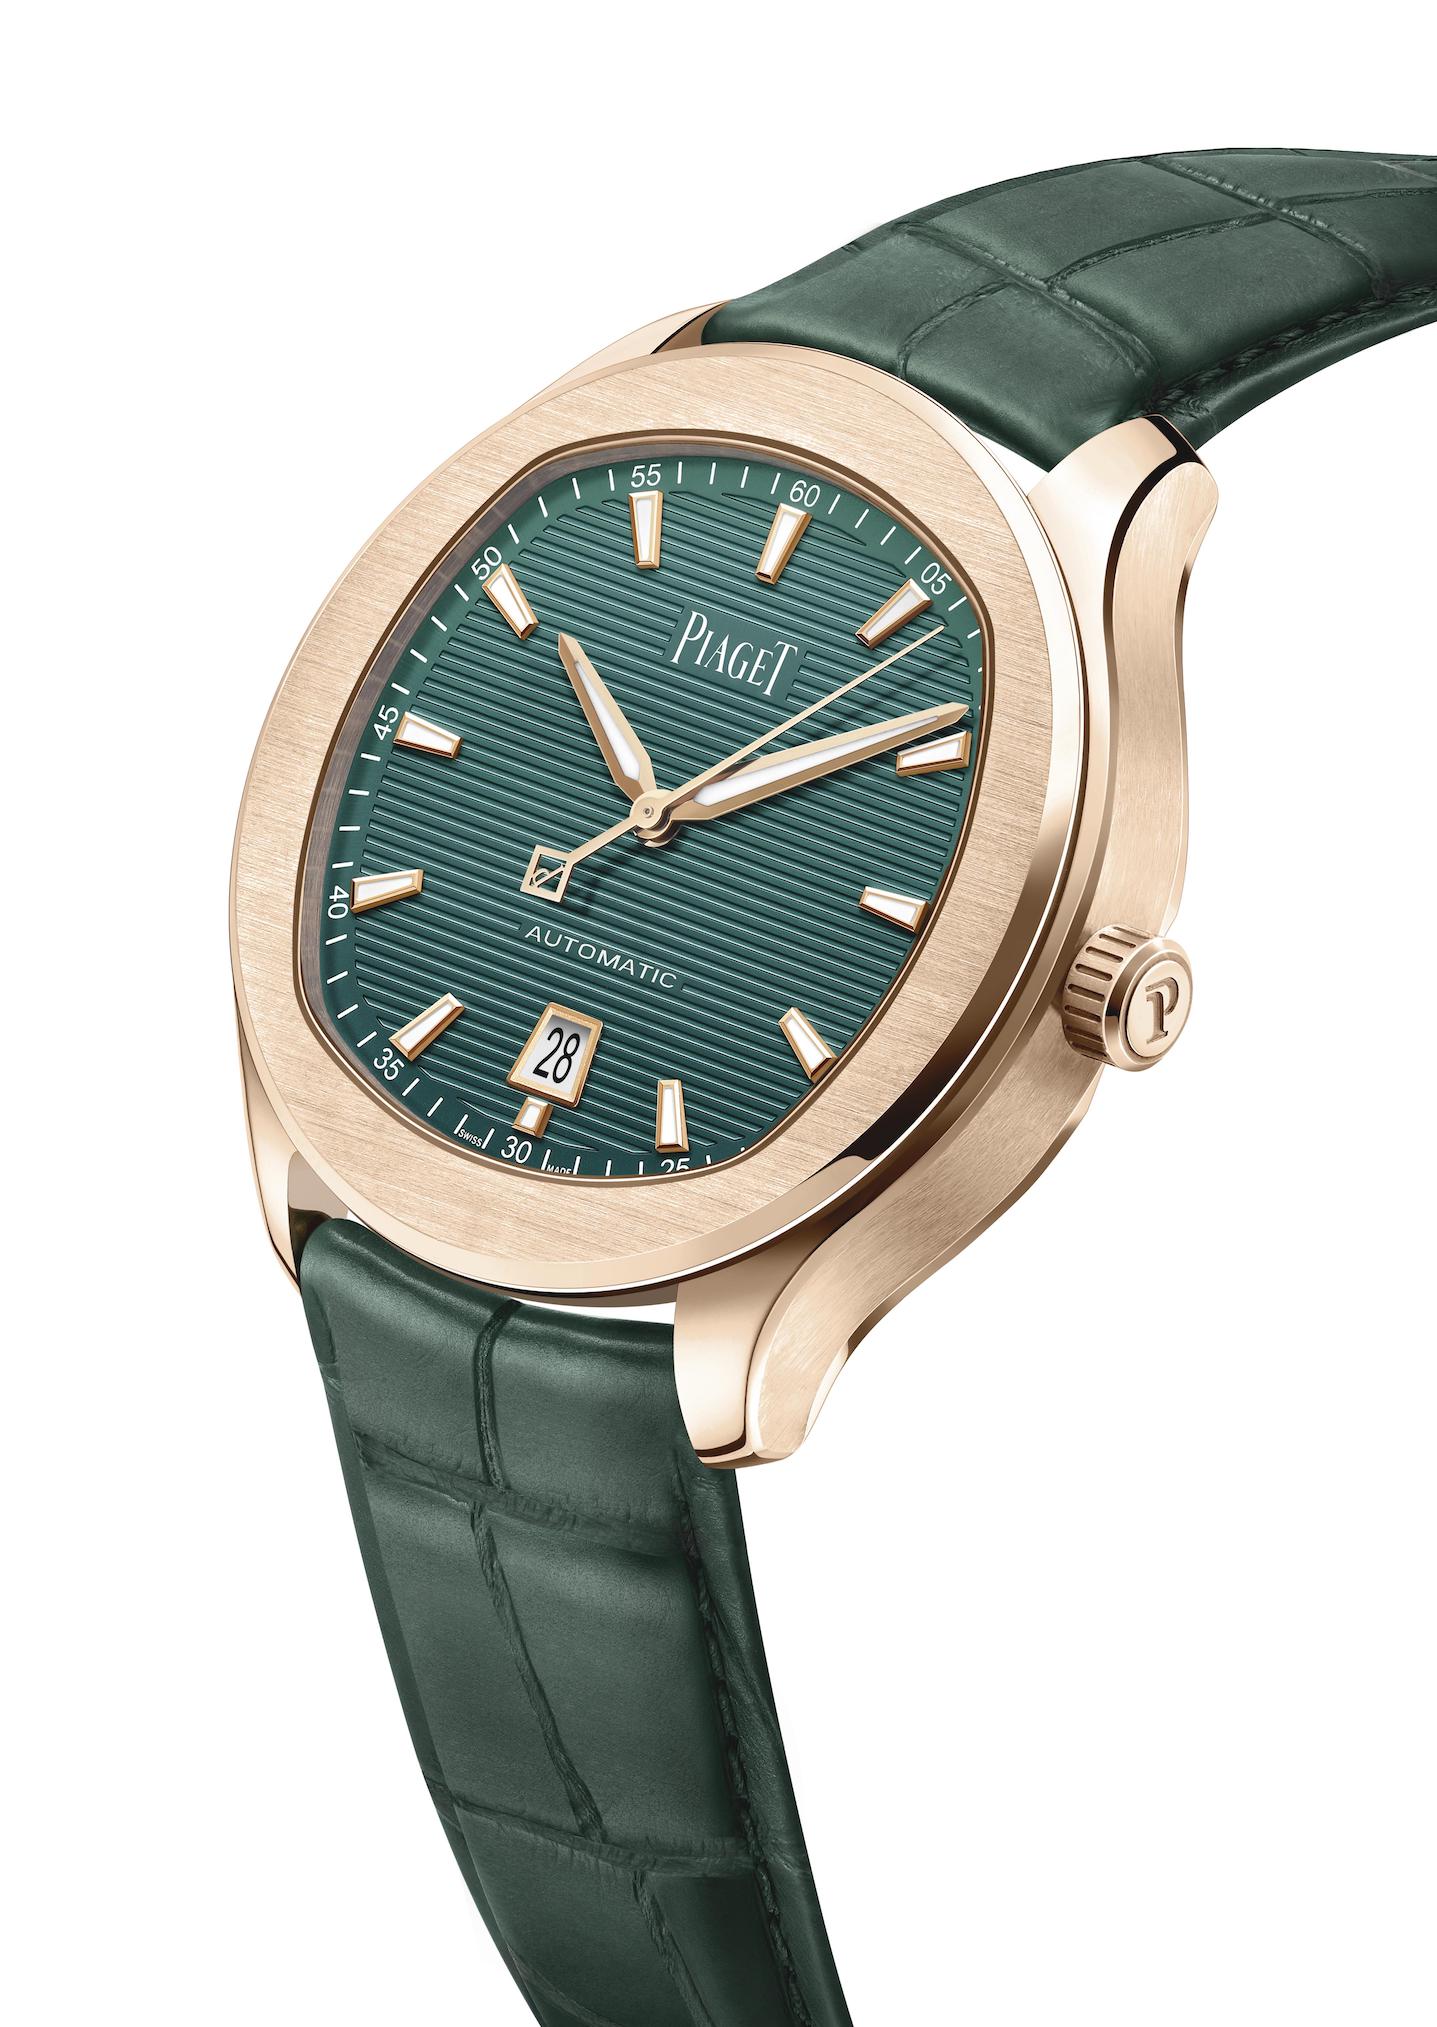 Piaget Polo Date Green